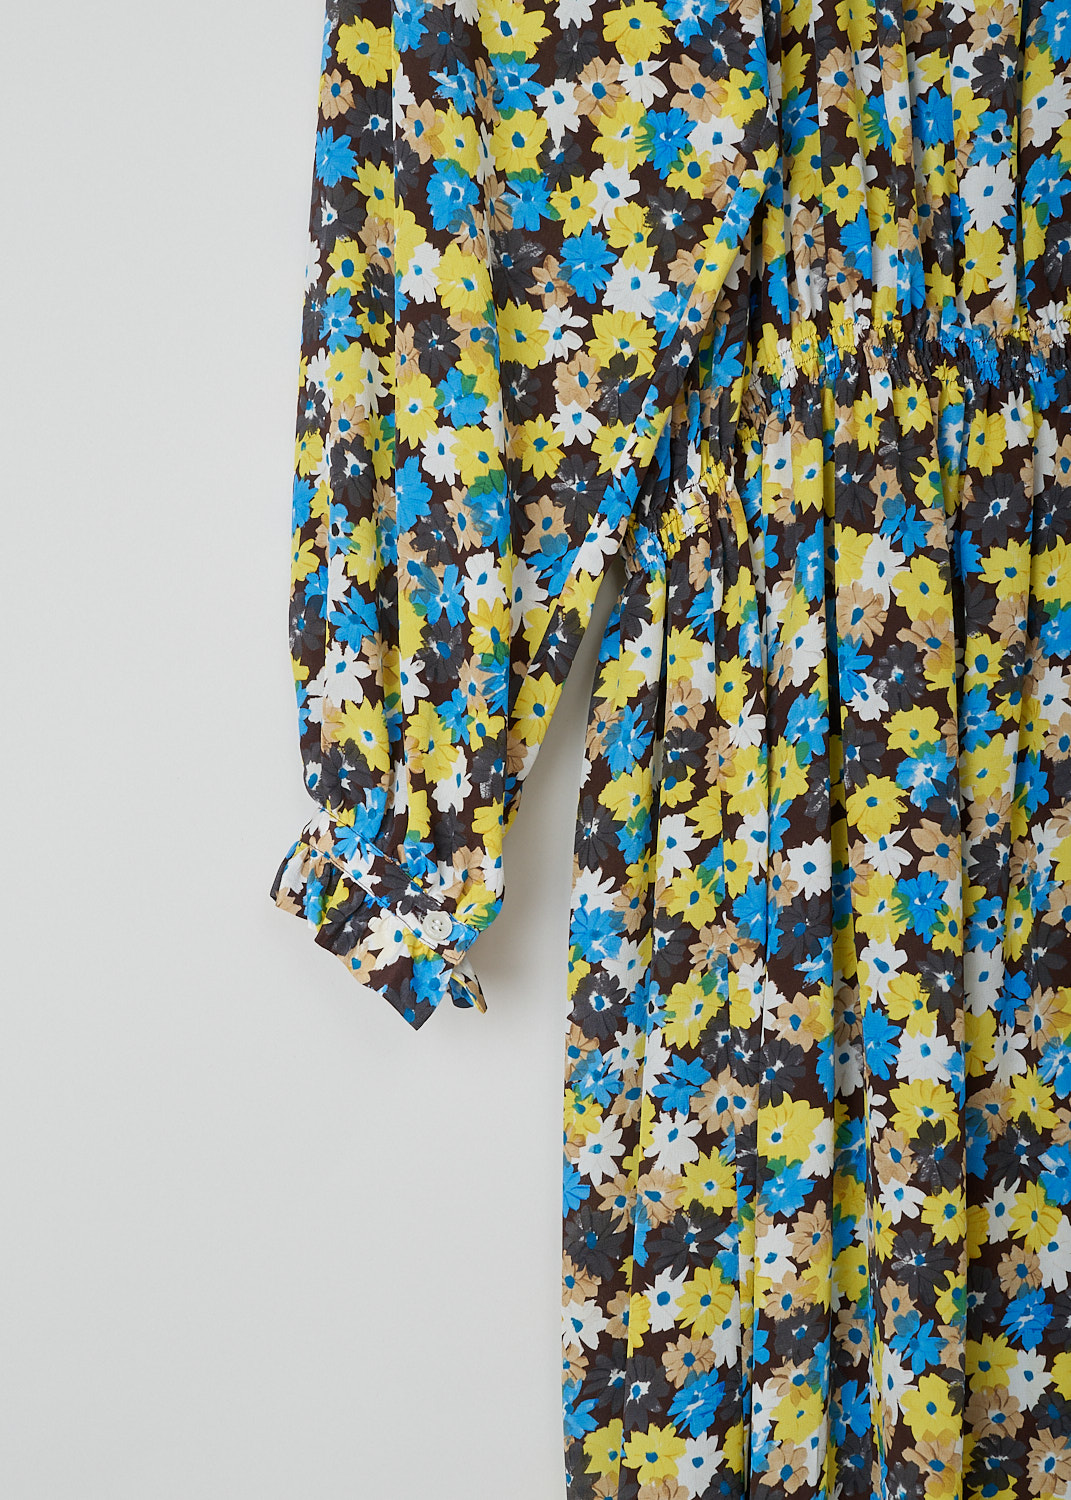 PLAN C, CRÊPE DE CHINE DAISY BOUQUET MIDI DRESS, ABCAD51K00_TS011_FIY04, Yellow, Print, Blue, Detail, This long sleeve Crêpe de Chine dress has an all-over Daisy Bouquet print. The dress has a ruched mandarin collar with a partial button placket going down the front. That same ruching can be found on the buttoned cuffs. The dress has an elasticated waistline. The hemline is straight.  
